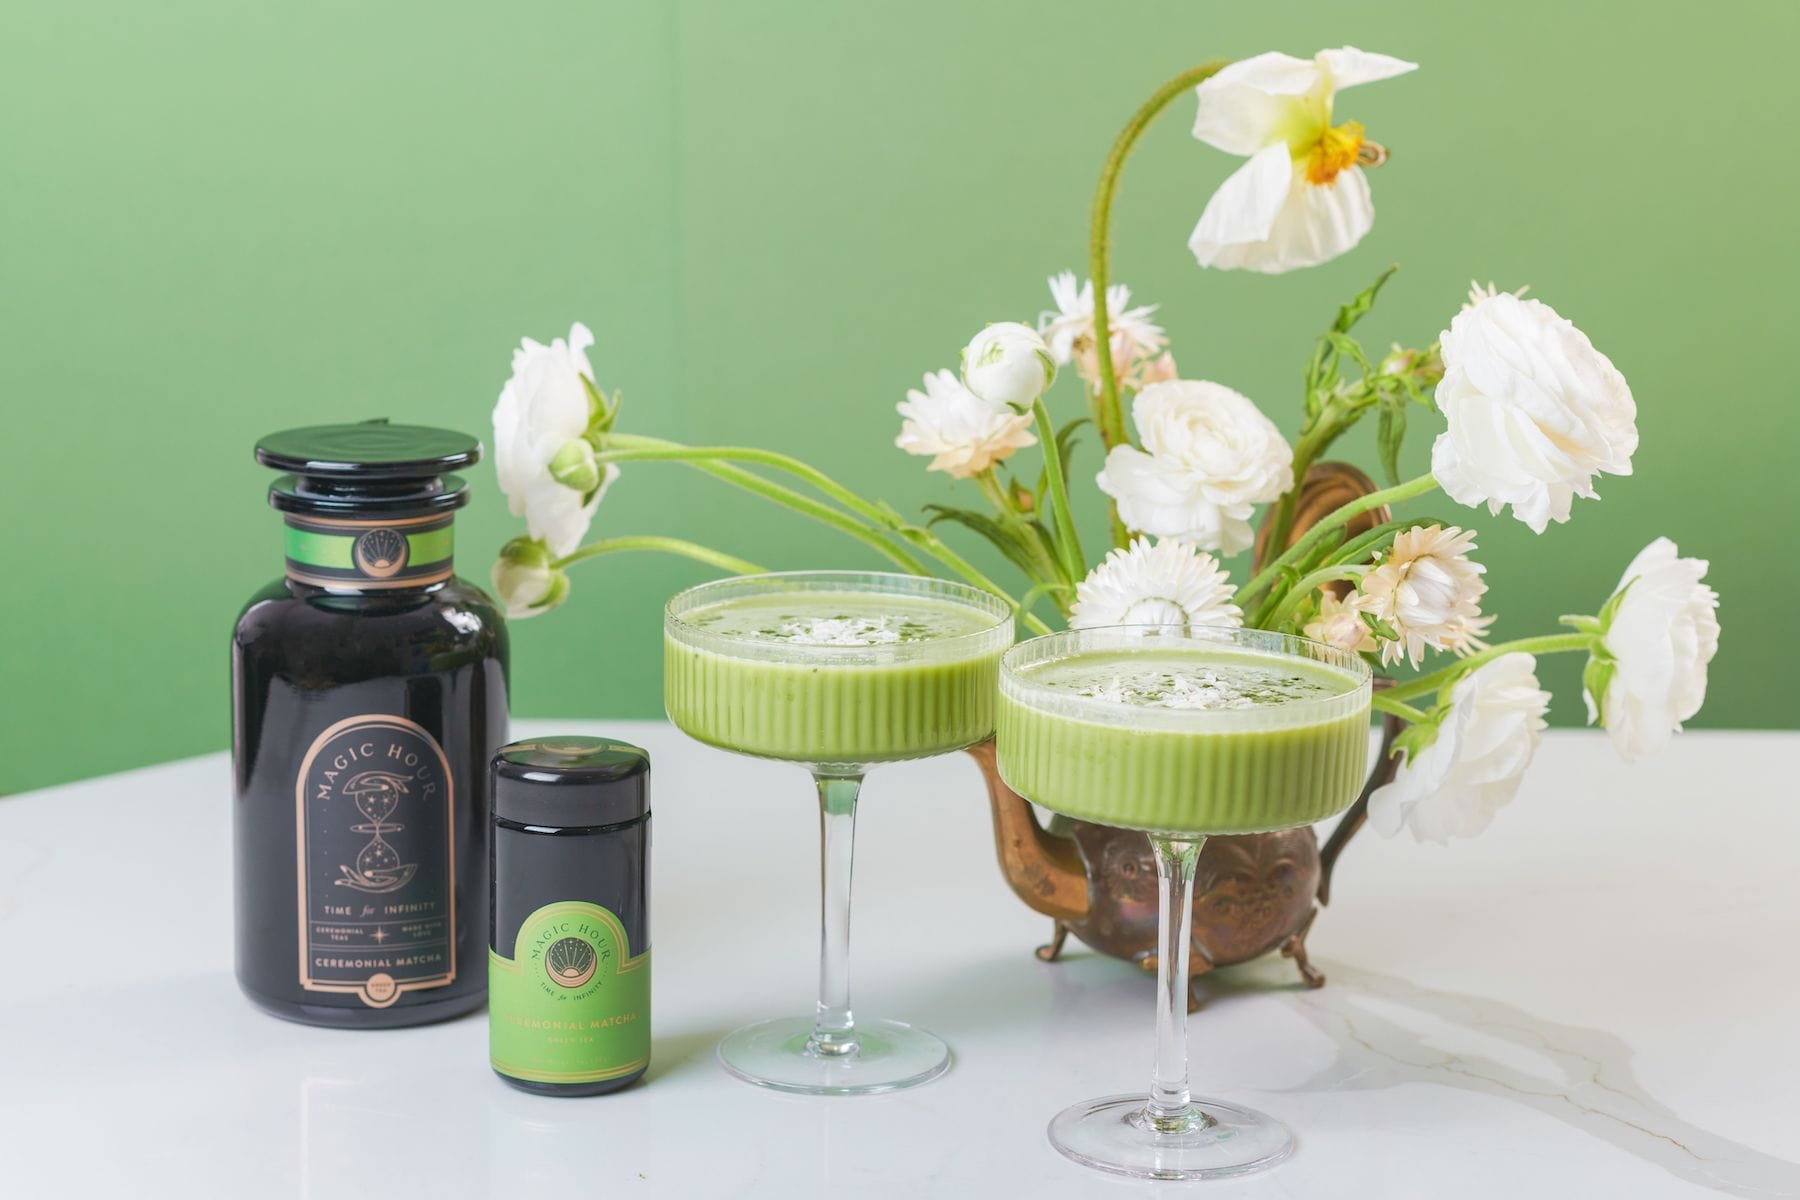 Two glasses of a green matcha drink are placed on a white surface. Beside them are two containers of organic matcha powder and syrup, with elegant black and green packaging. In the background, there is a decorative vase filled with white flowers against a green wall, embodying the essence of Magic Hour's Ceremonial Matcha Traveler Gift Box.